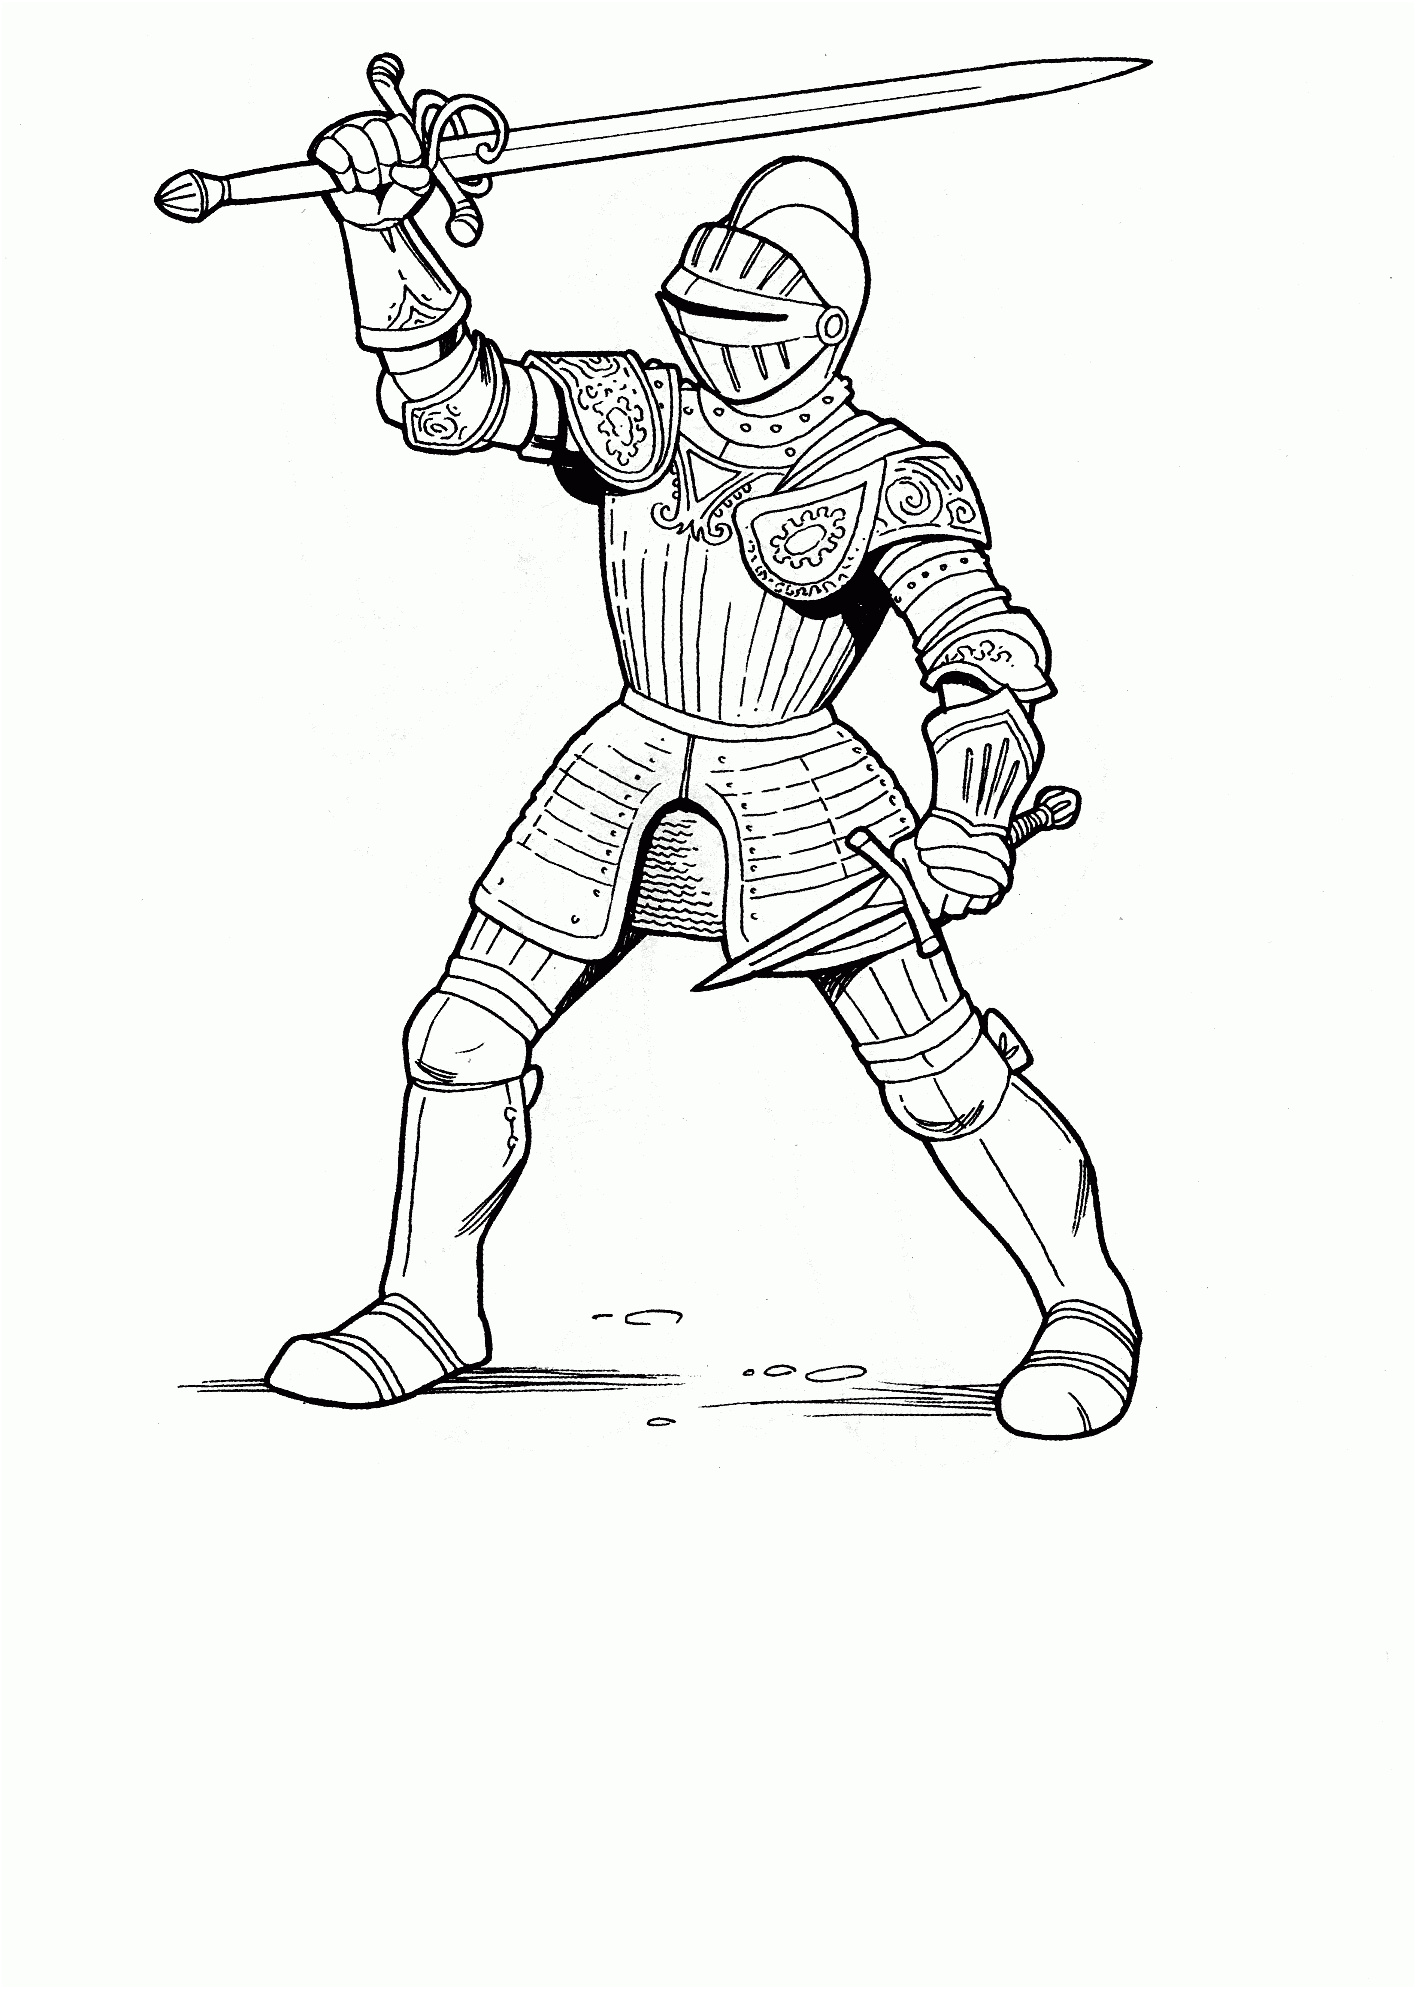 knight coloring sheets knight coloring sheets coloringpages free printable pictures of knights